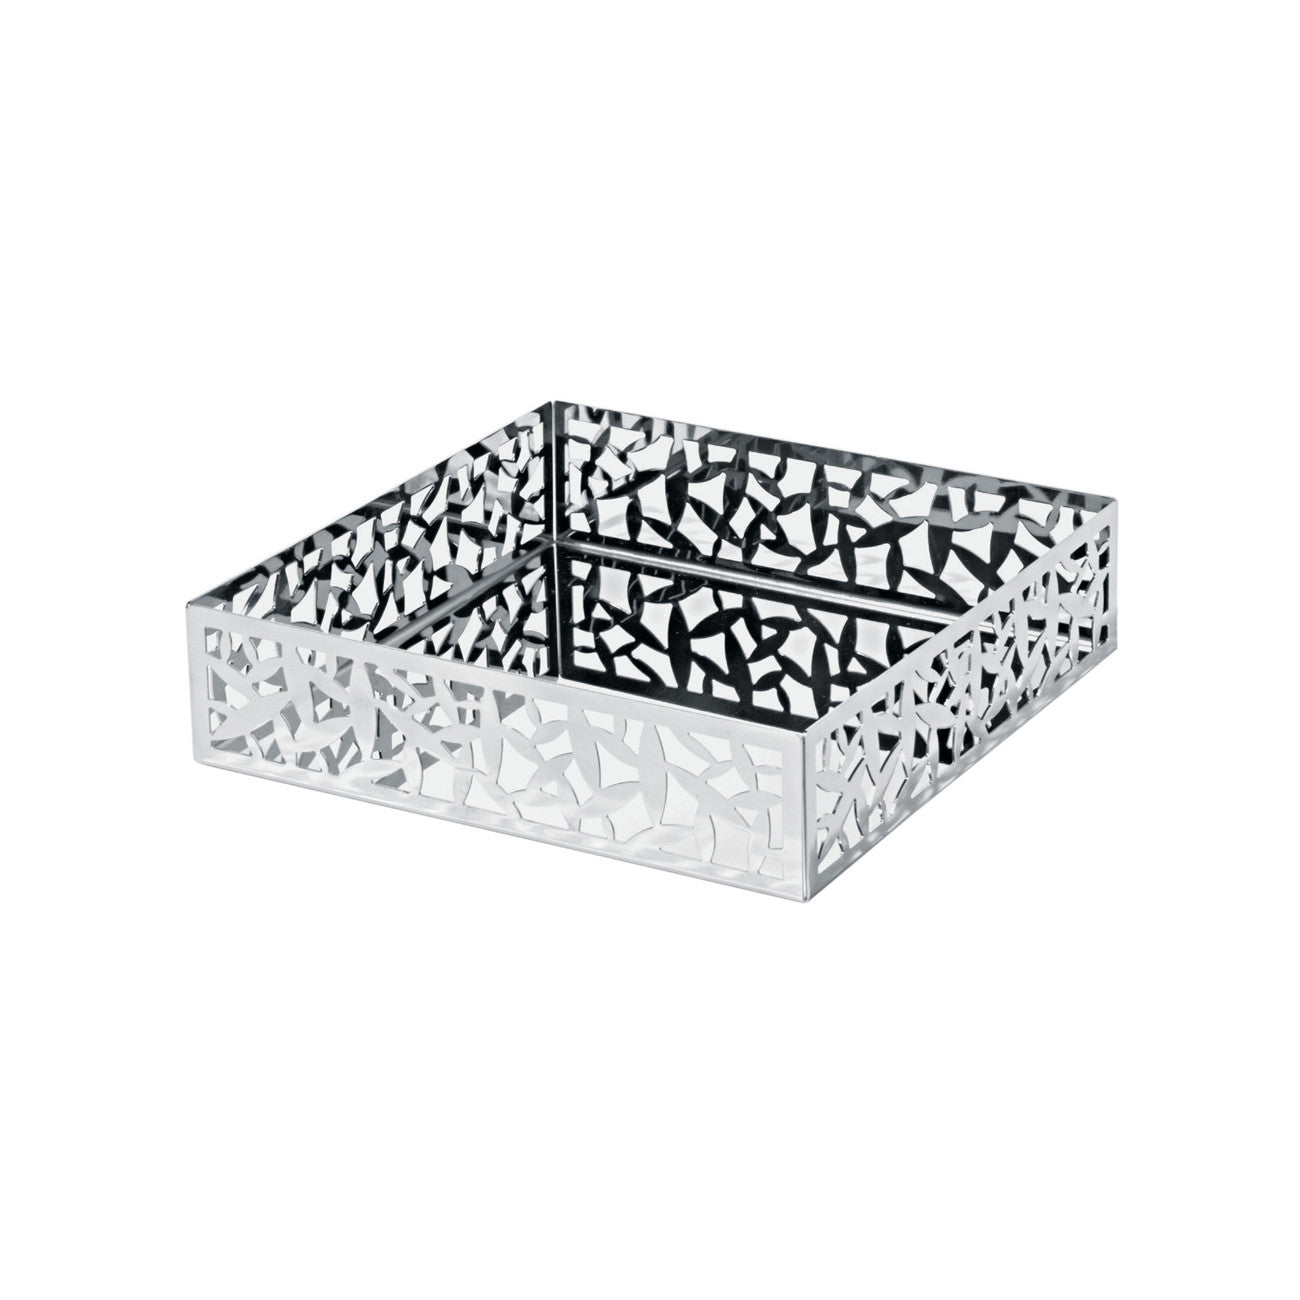 Alessi Cacti! Paper napkin holder, flat with perforated edge in 18/10 stainless steel.